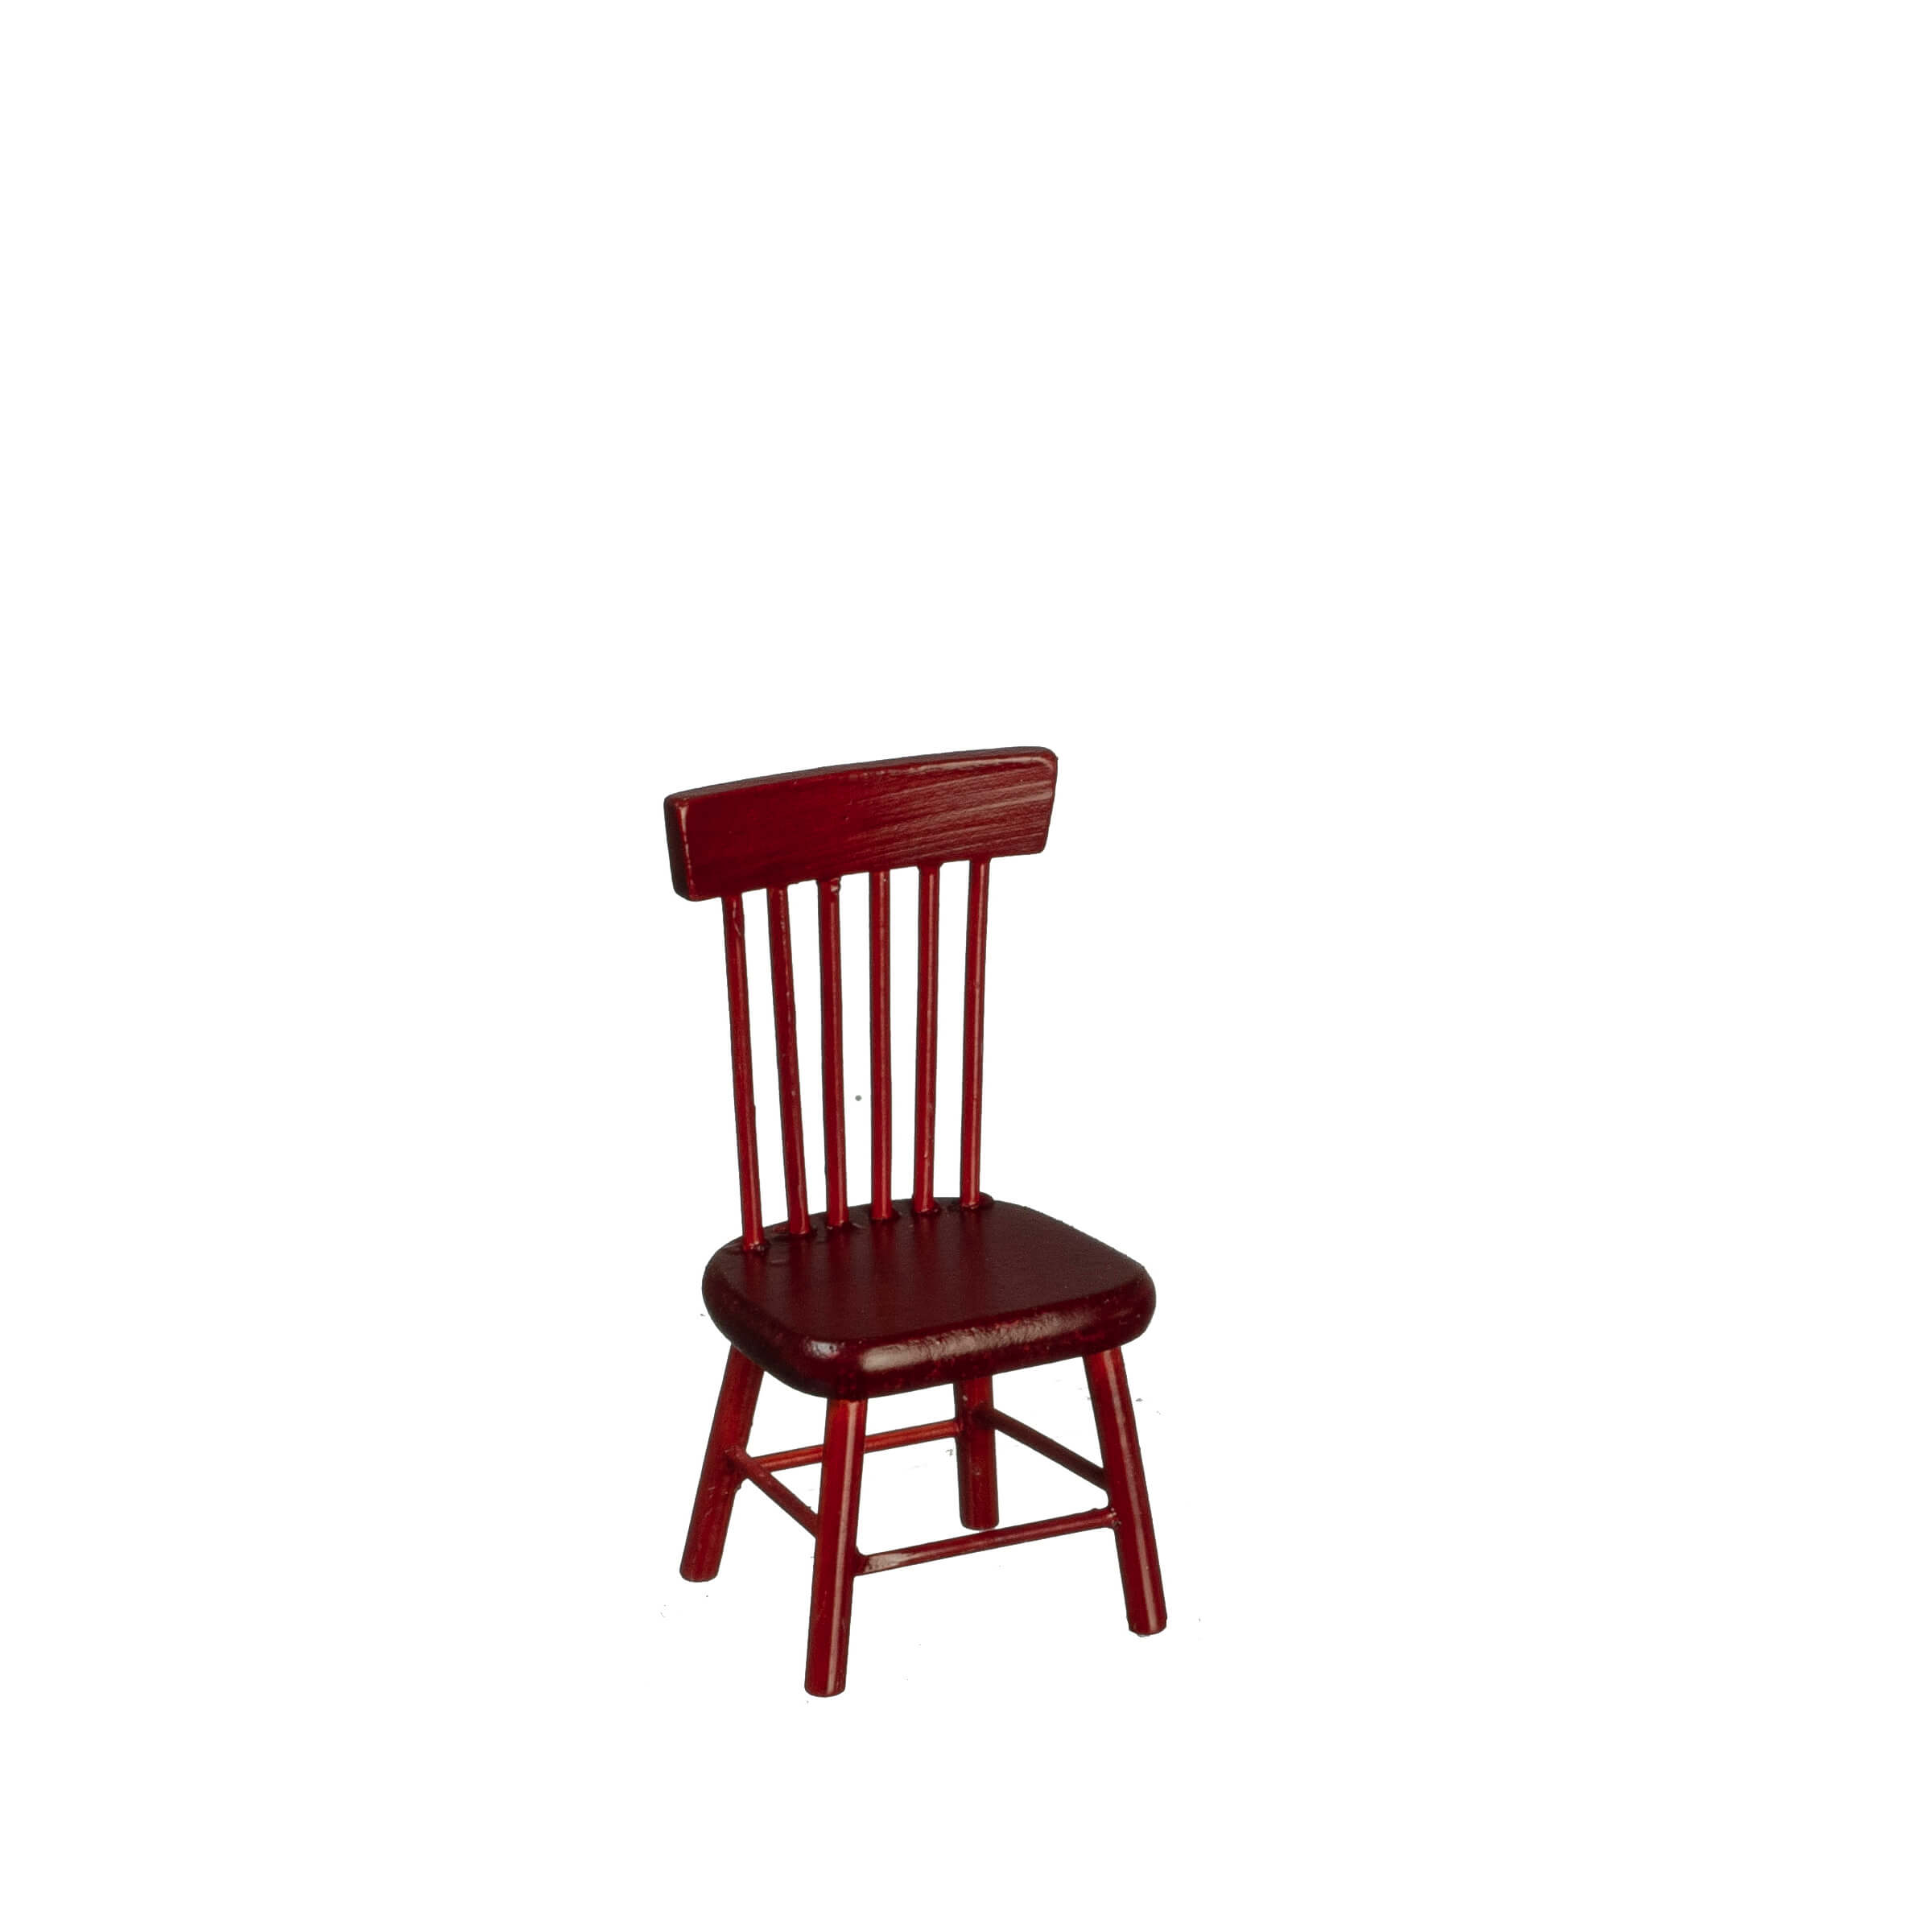 Spindle Back Dining Room Side Chair - Mahogany